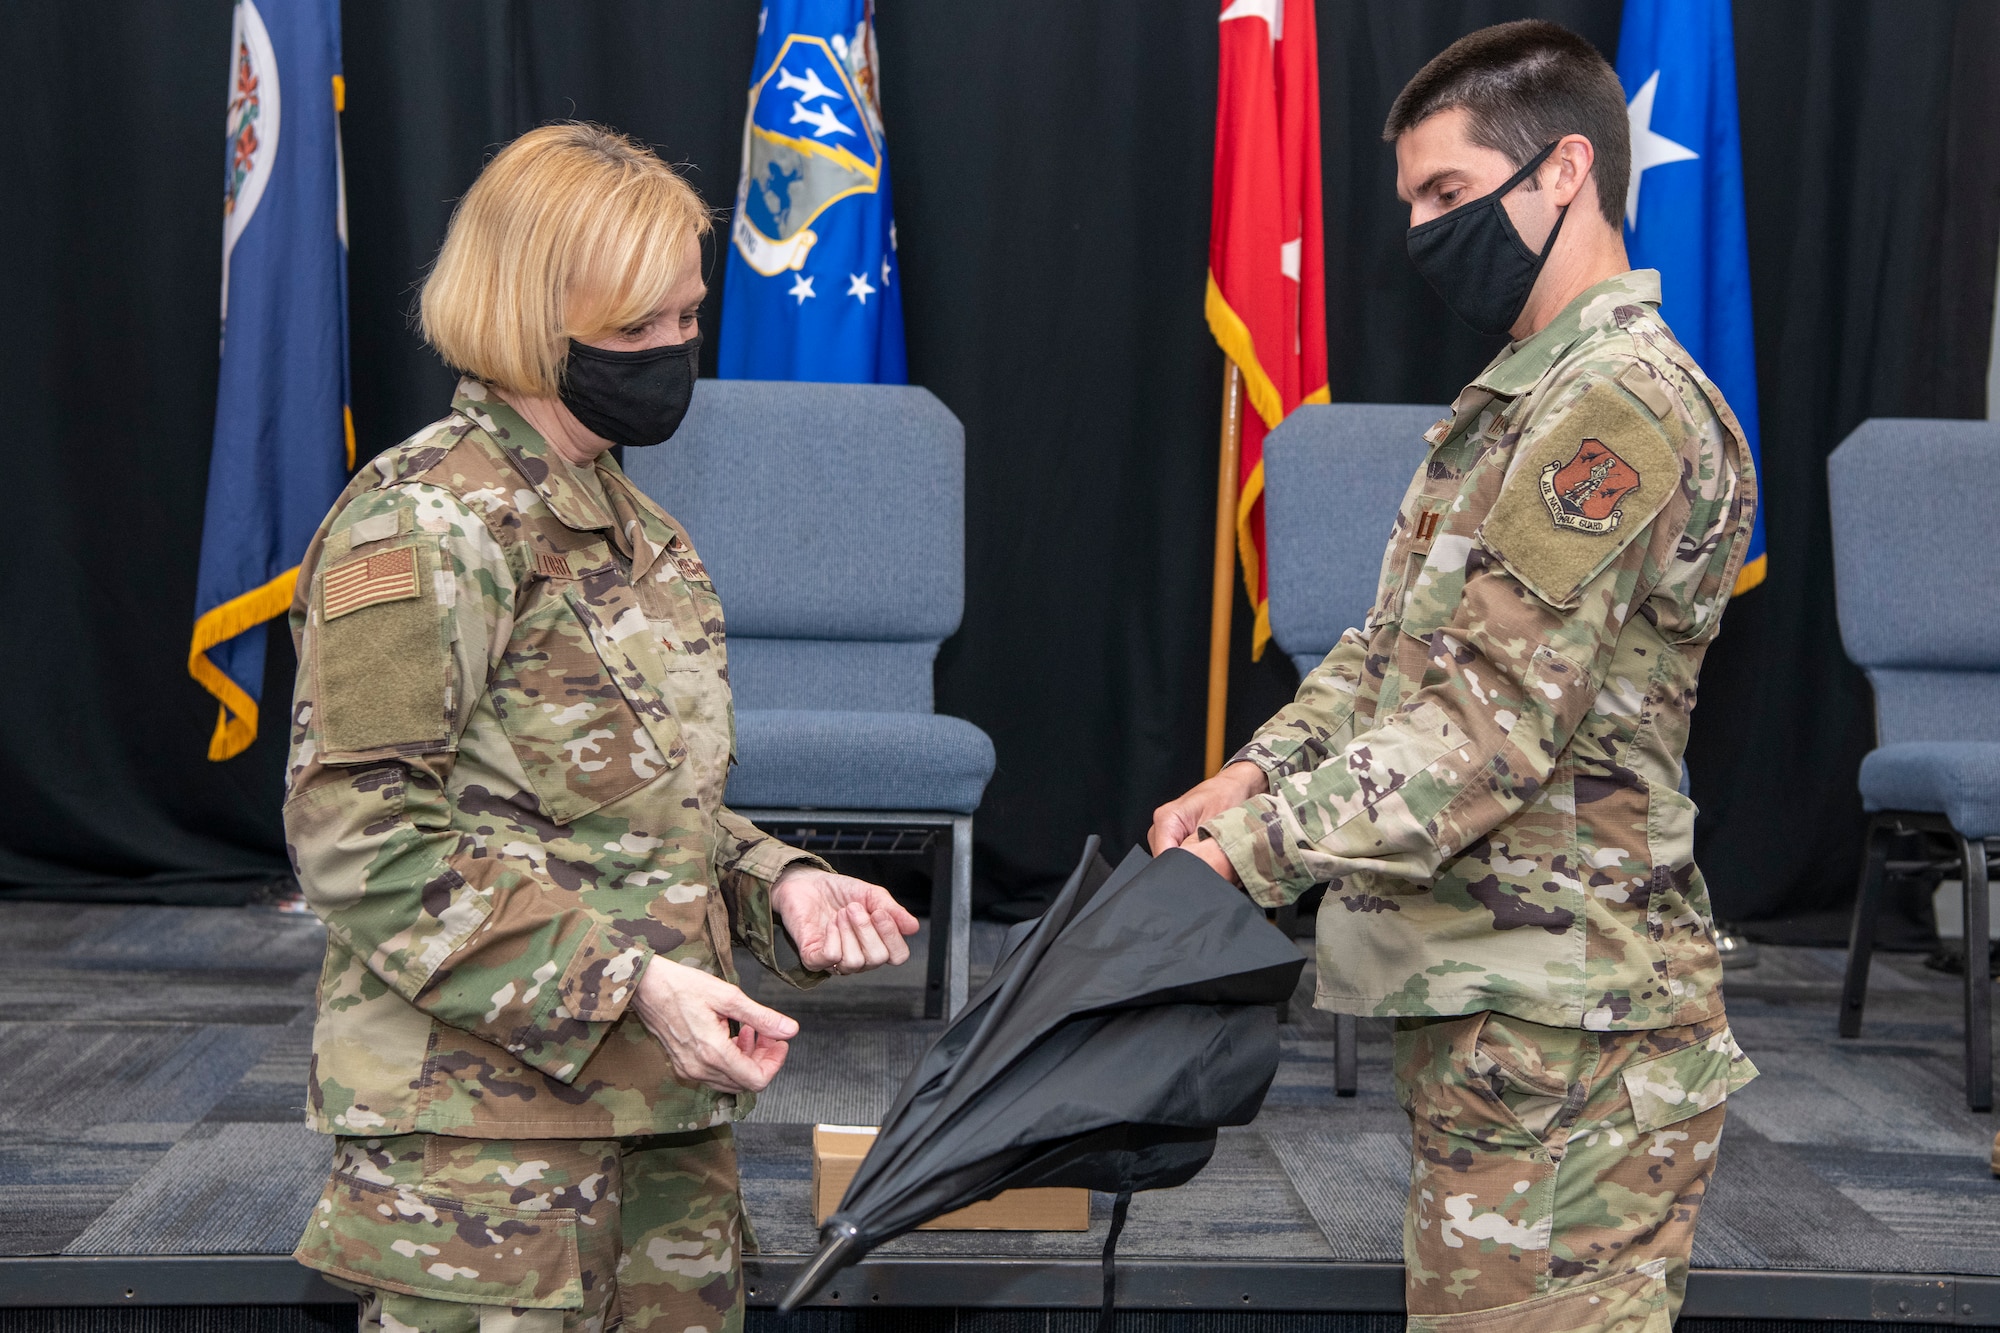 Brig. Gen. Toni M. Lord, Virginia National Guard air component commander, is gifted an umbrella signed by members of the 185th Cyberspace Operations Squadron prior to an end of mobilization ceremony Feb. 25, 2022, in Hampton, Virginia.